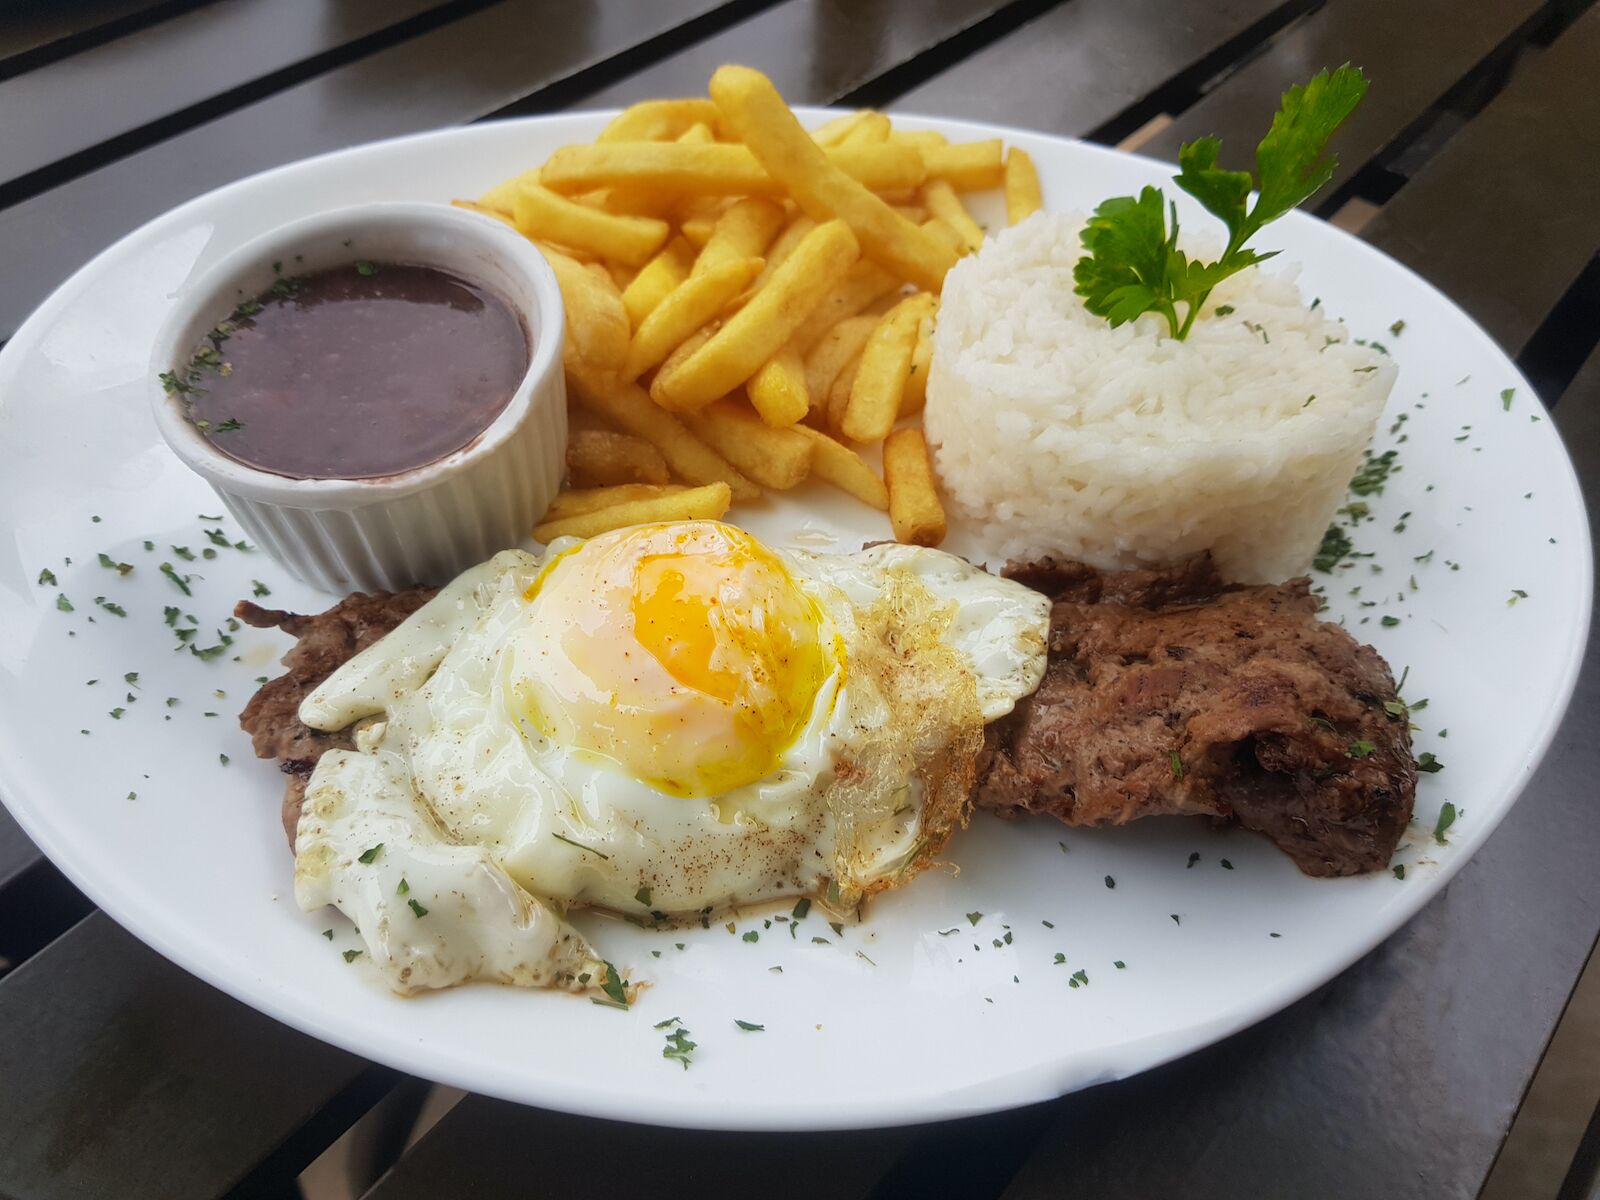 This Colombian breakfast is known as steak on horseback, a steak topped with a fried egg served with aside of rice